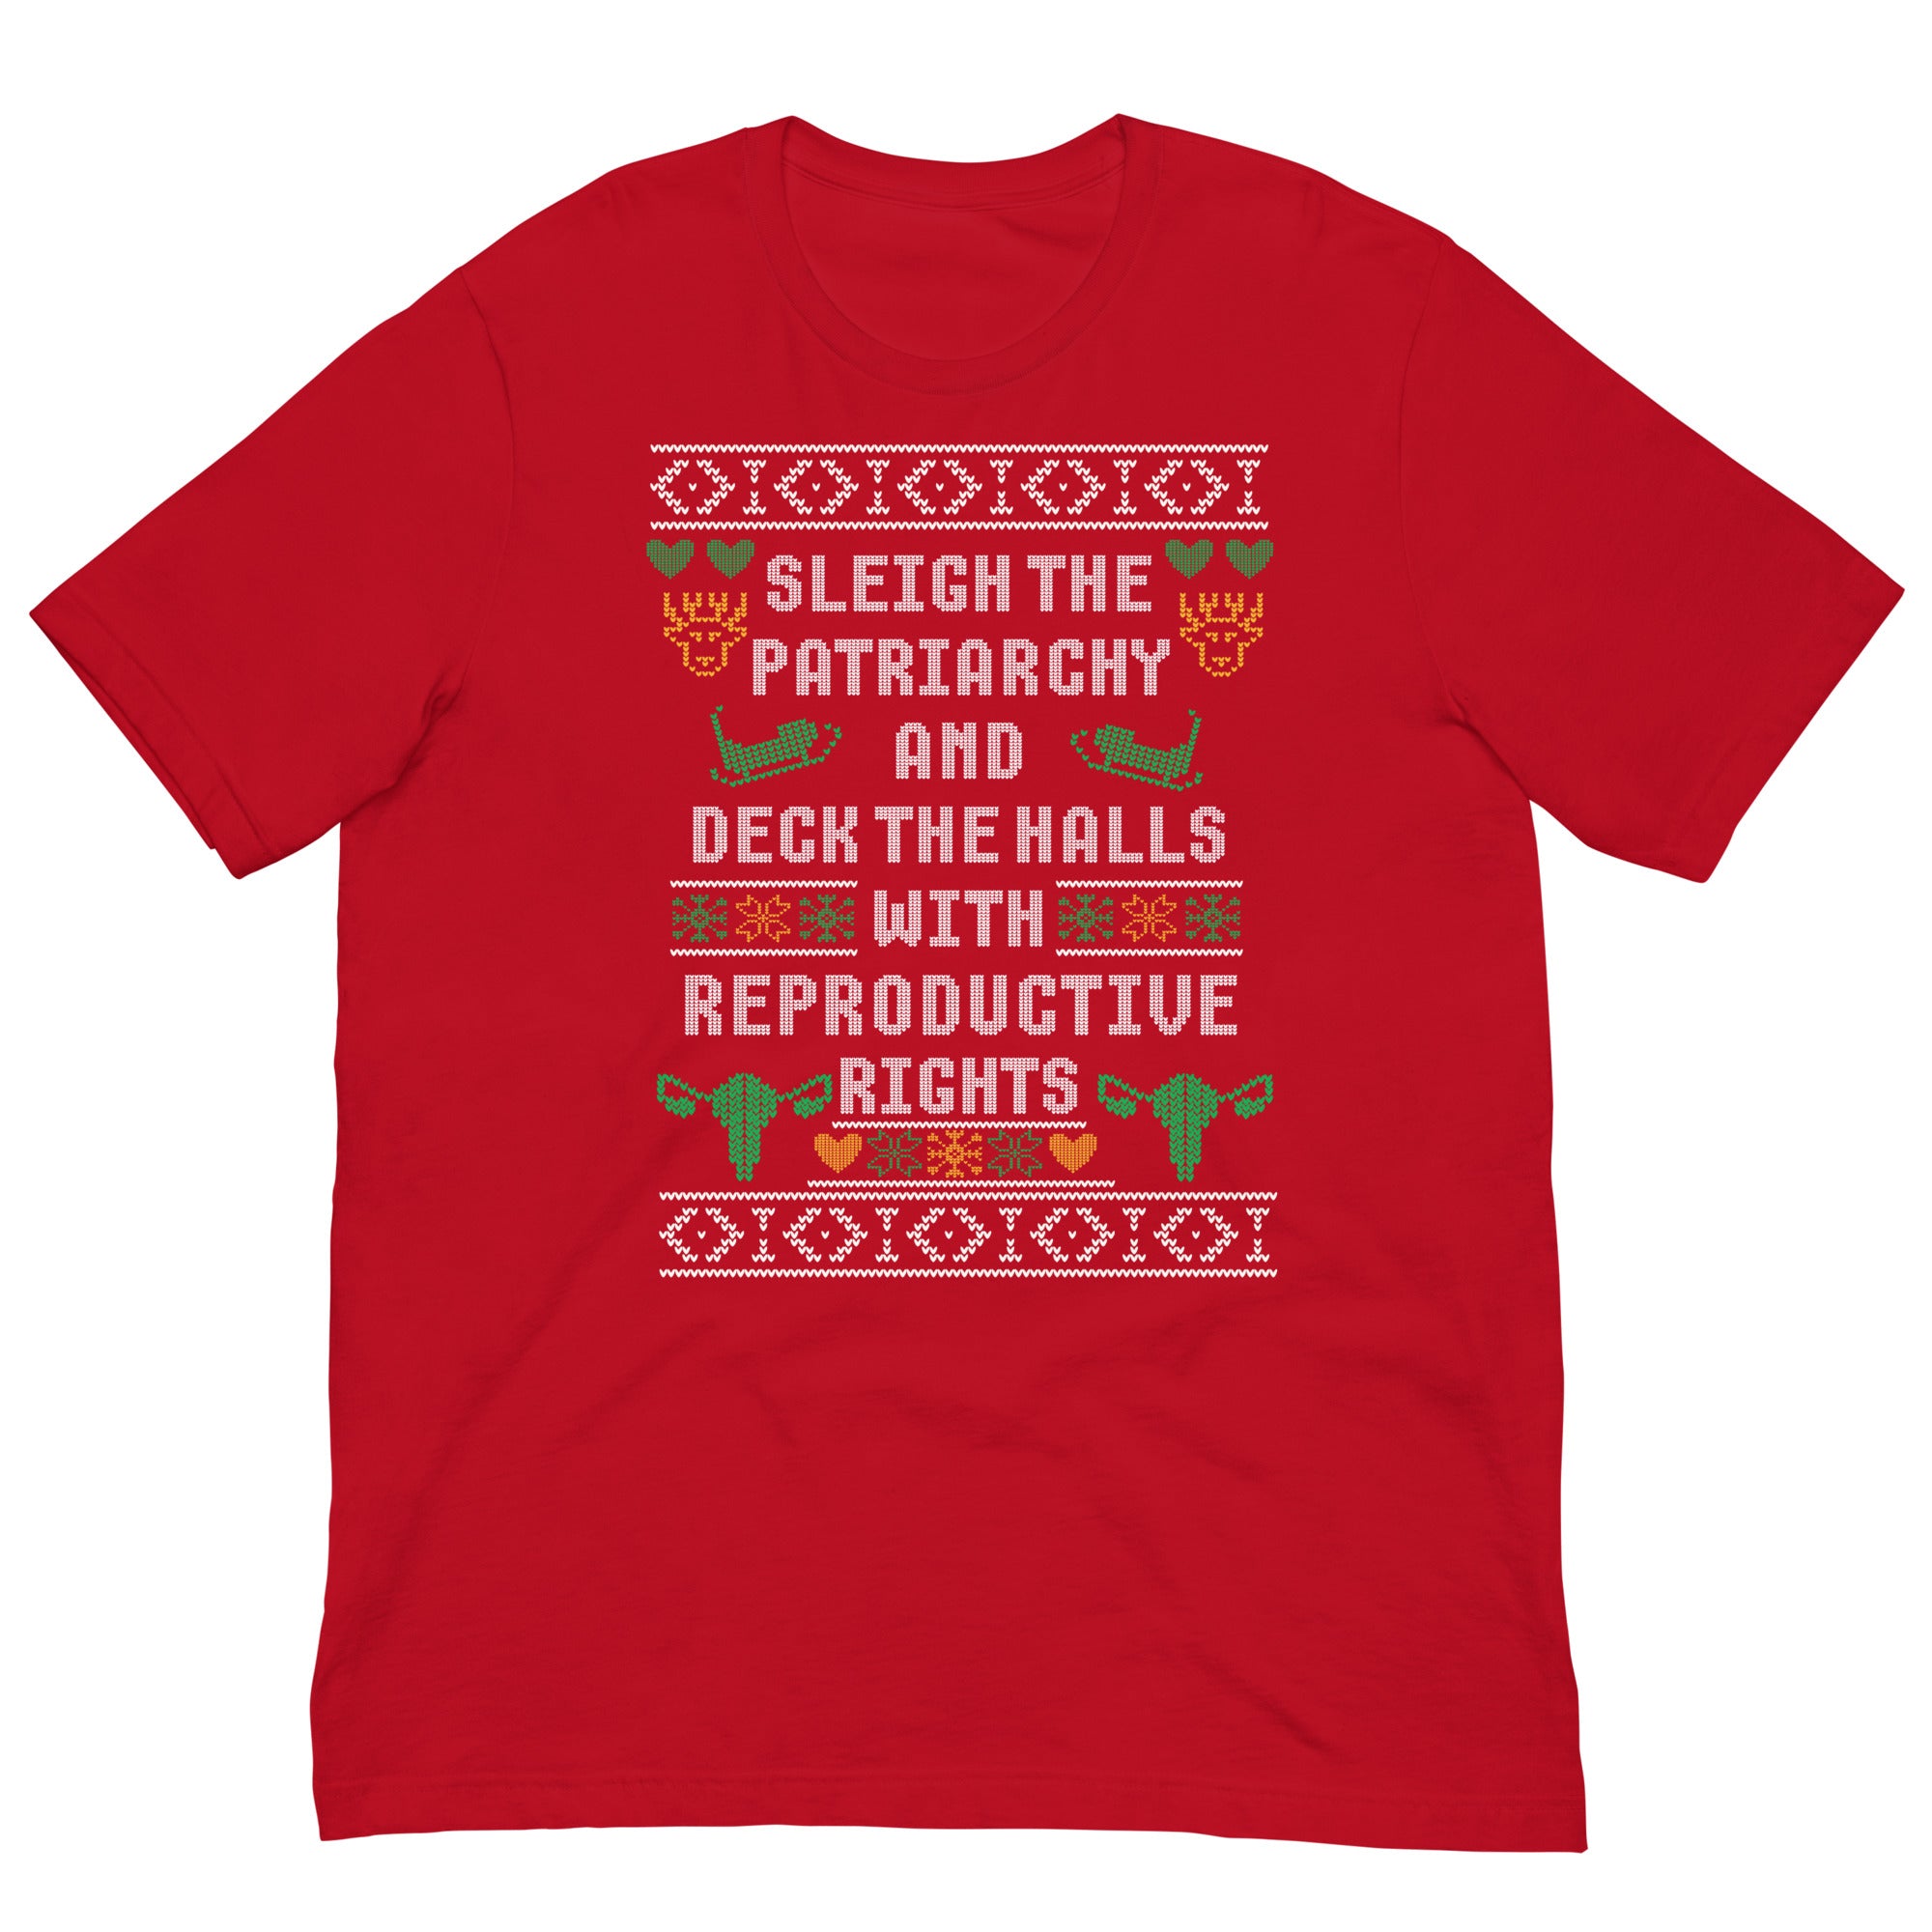 Sleigh the Patriarchy Red Tee